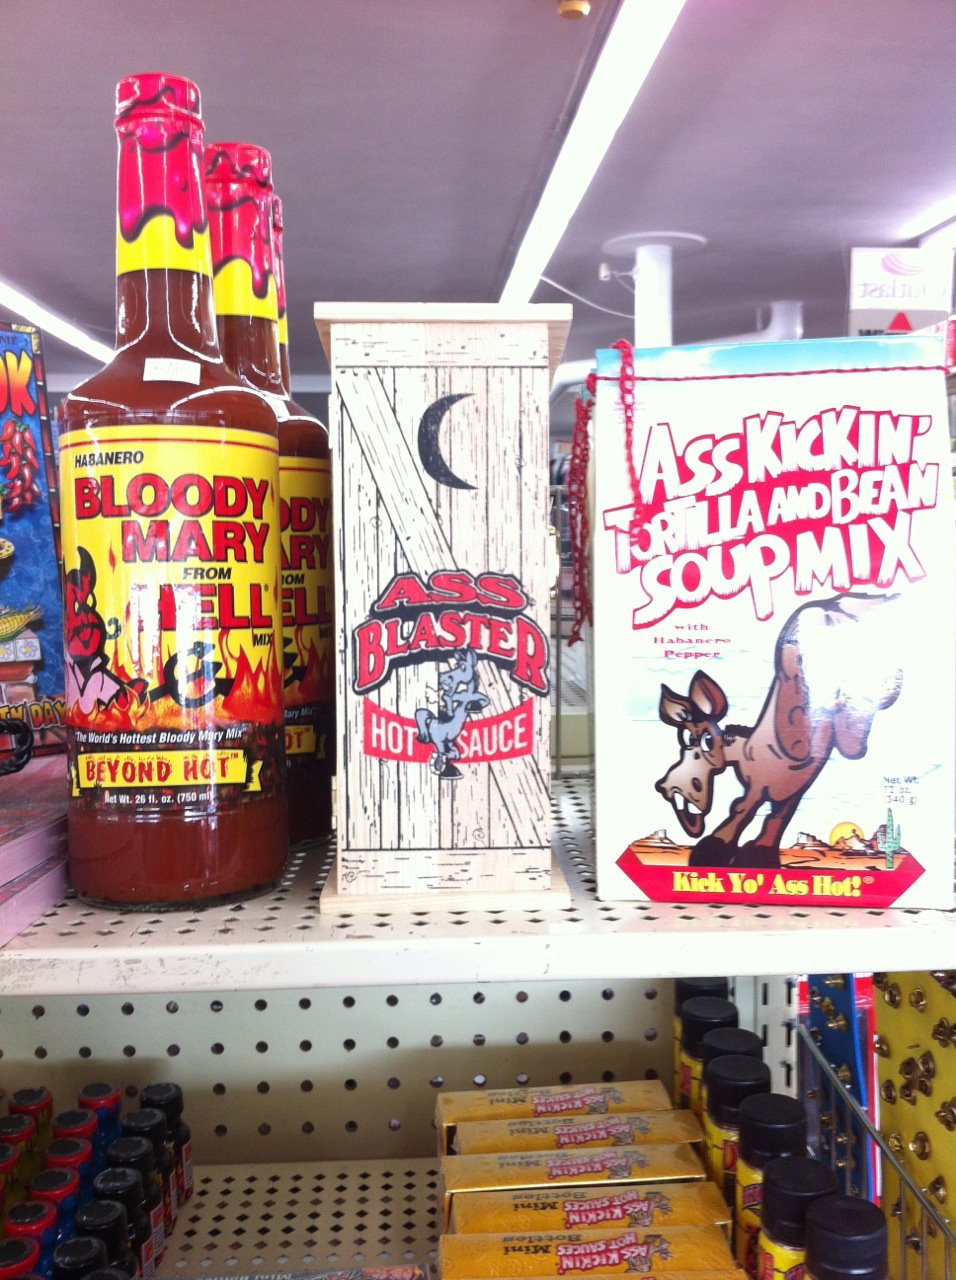 ass blaster hot sauce comes in a box shaped like an outhouse, wtf